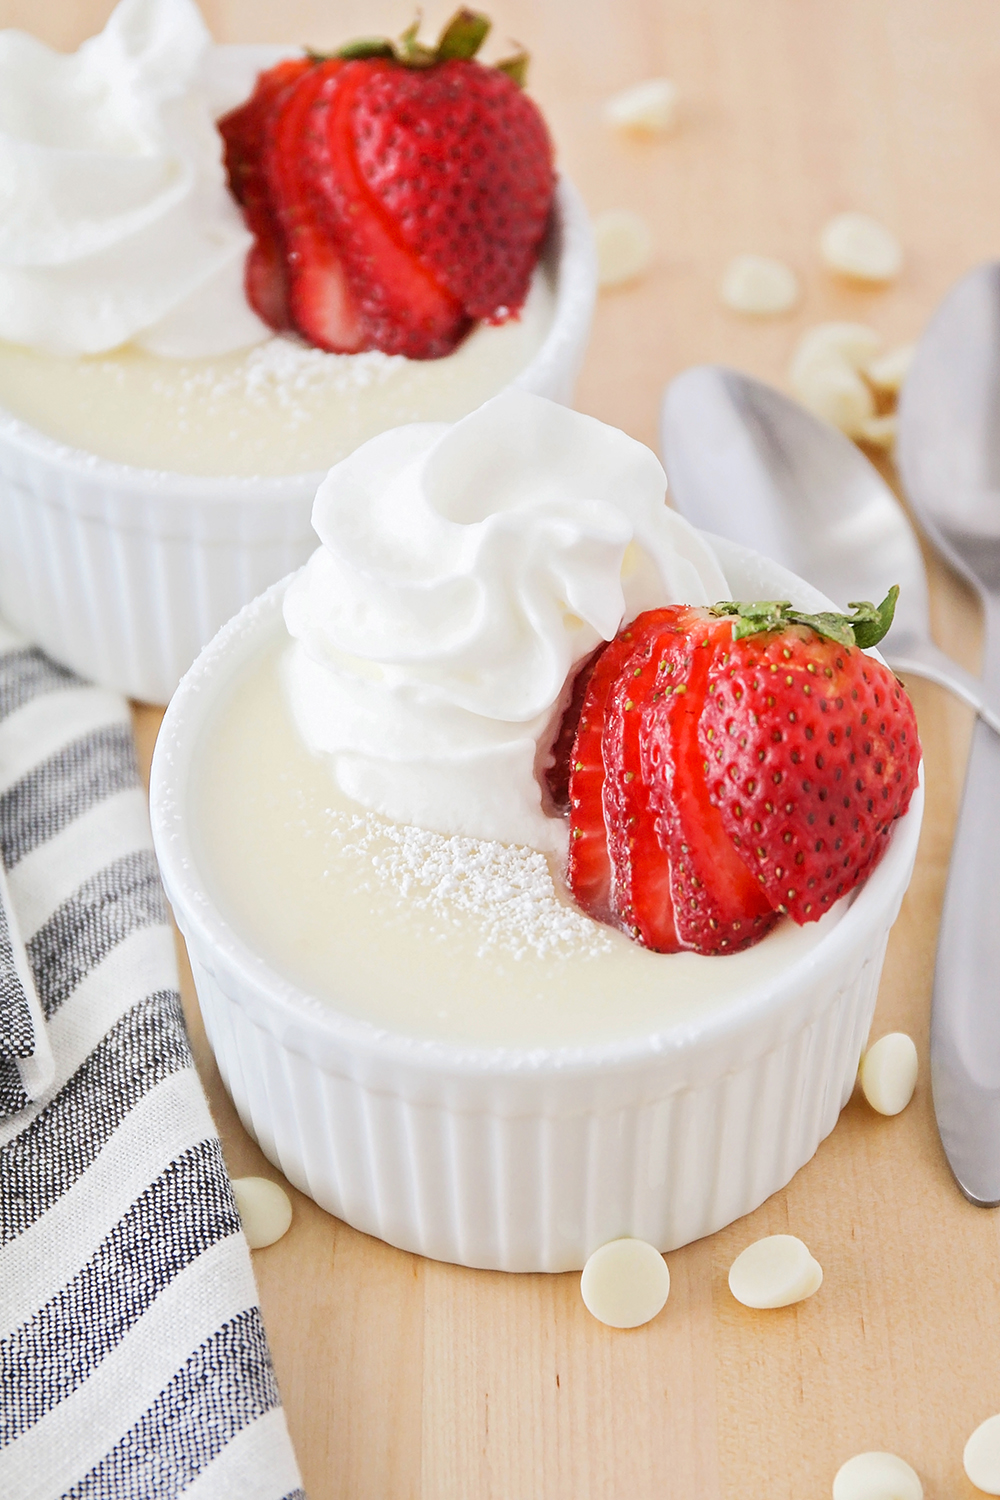 This rich and silky smooth white chocolate pudding is so easy to make at home, and way better than store-bought!